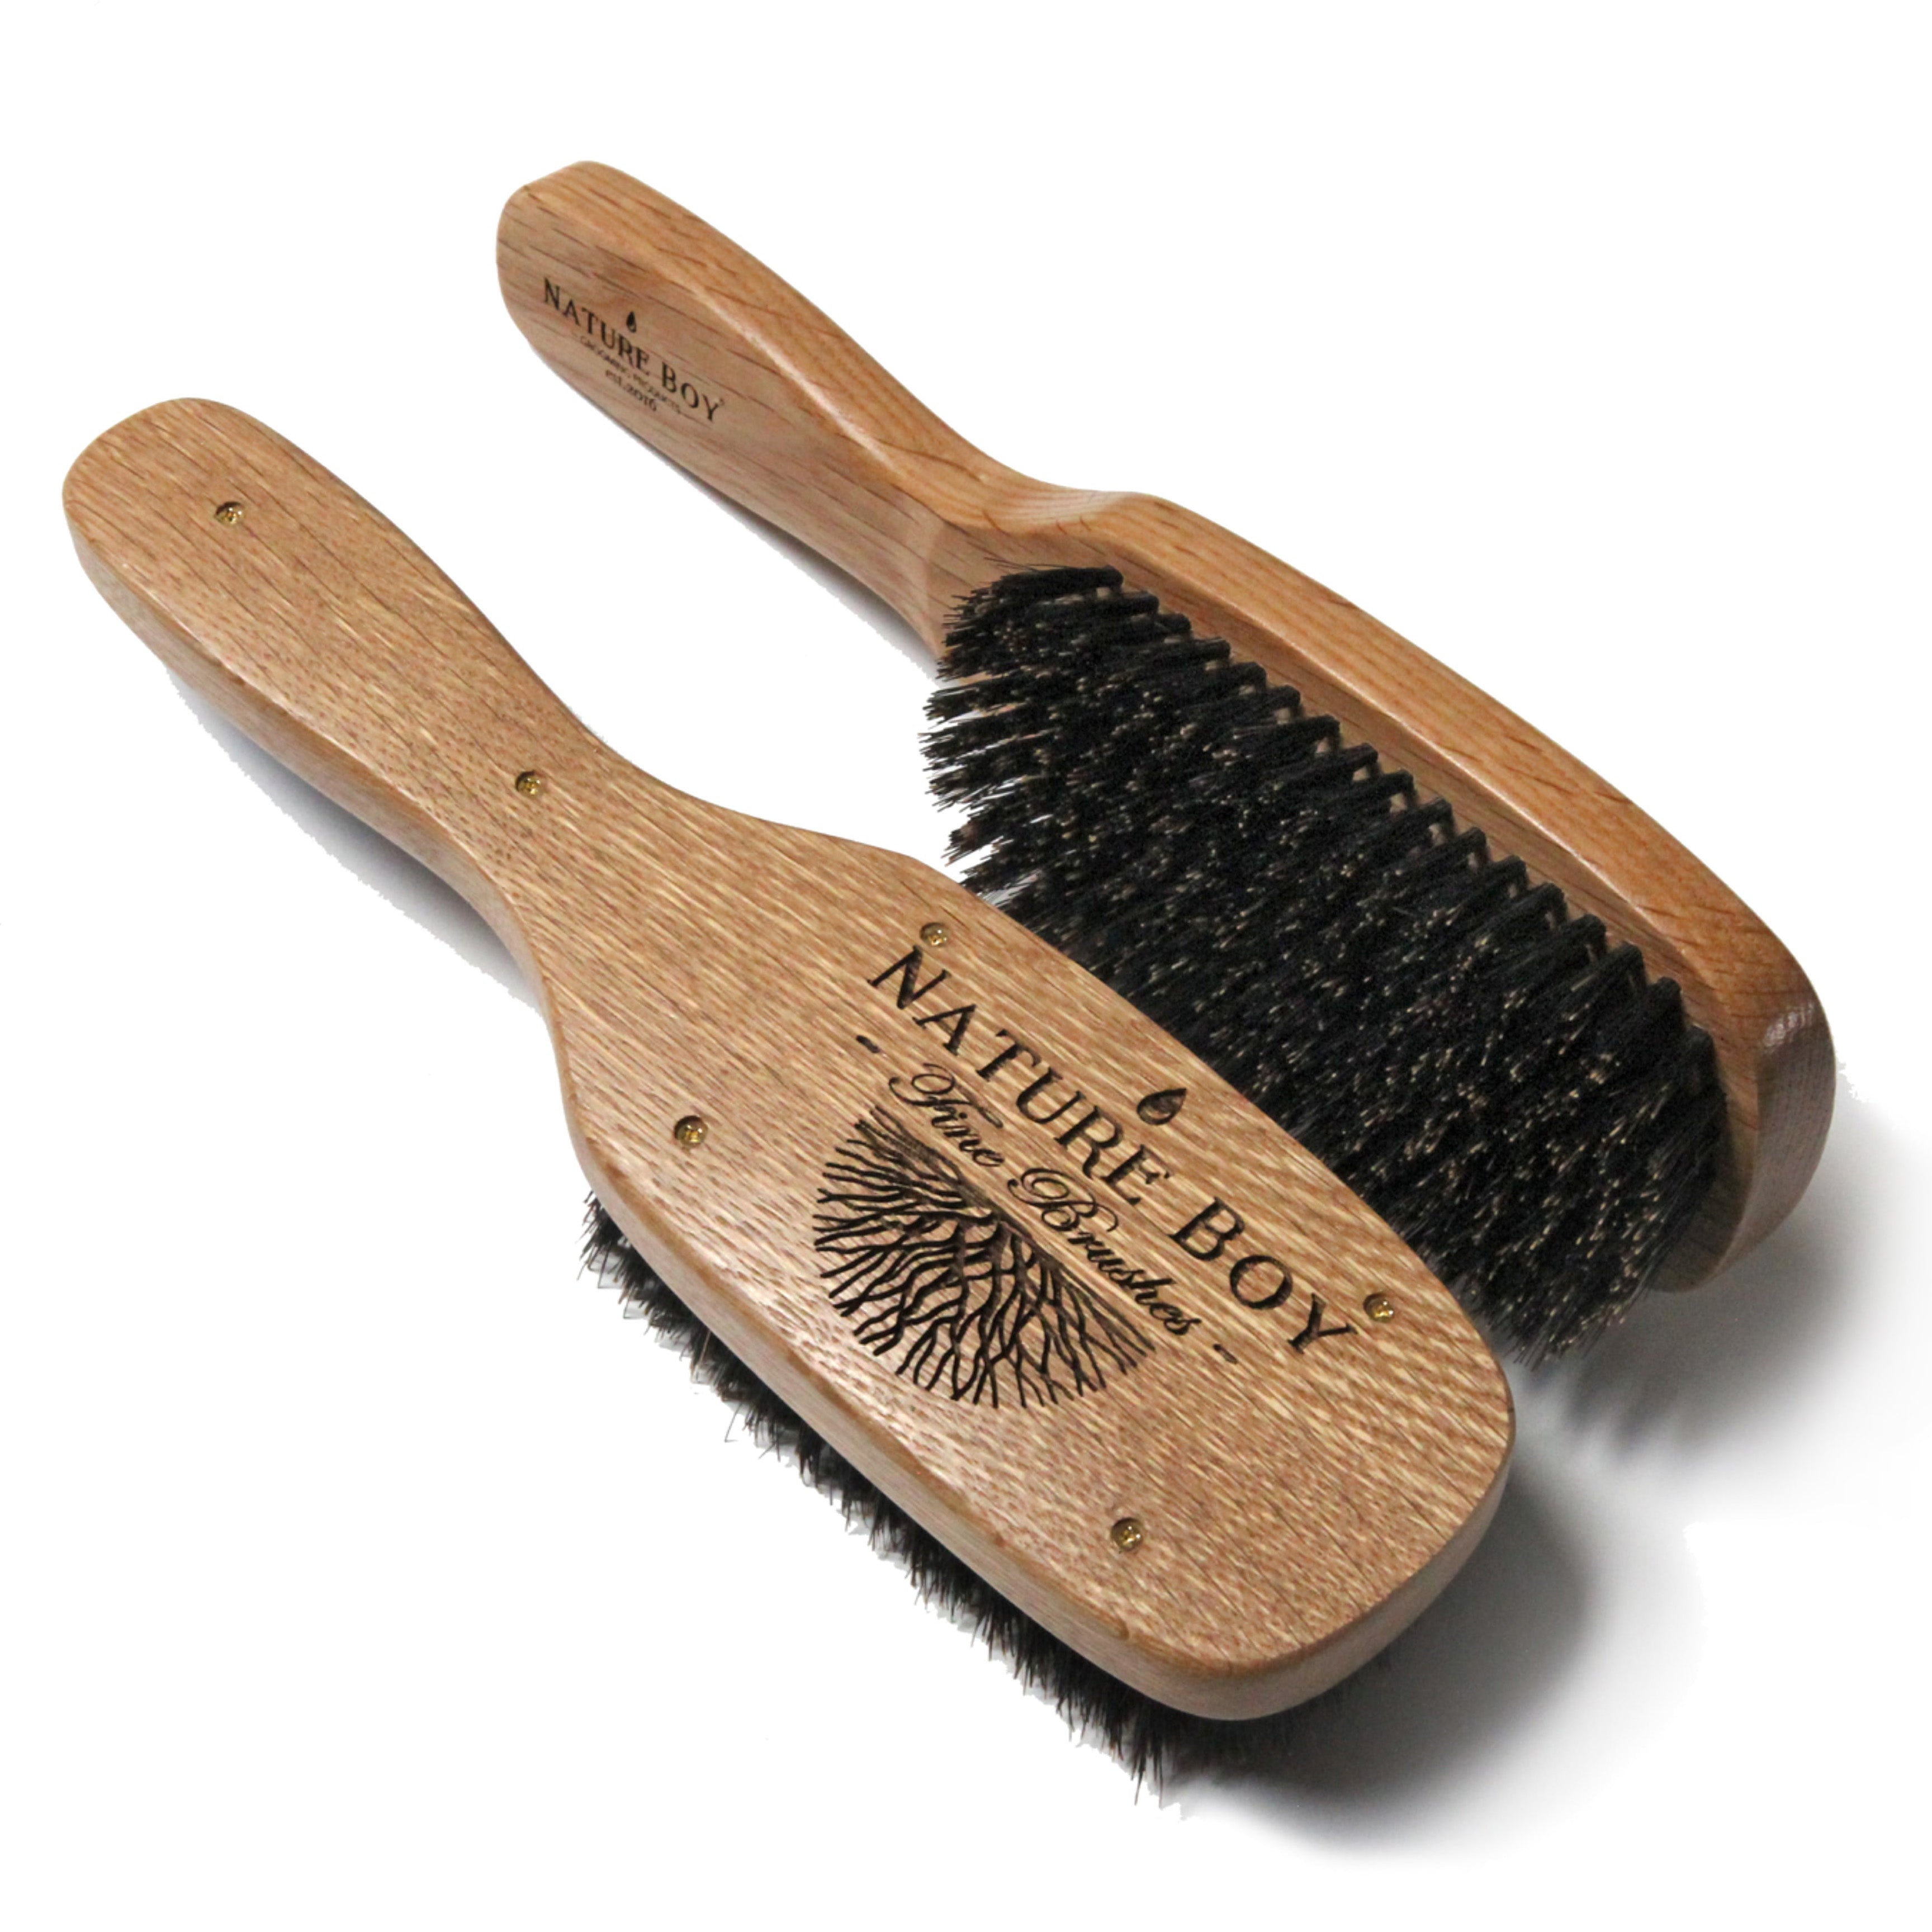 nature boy grooming products long handle boar bristle hair wave brush firm oak wood 100% natural